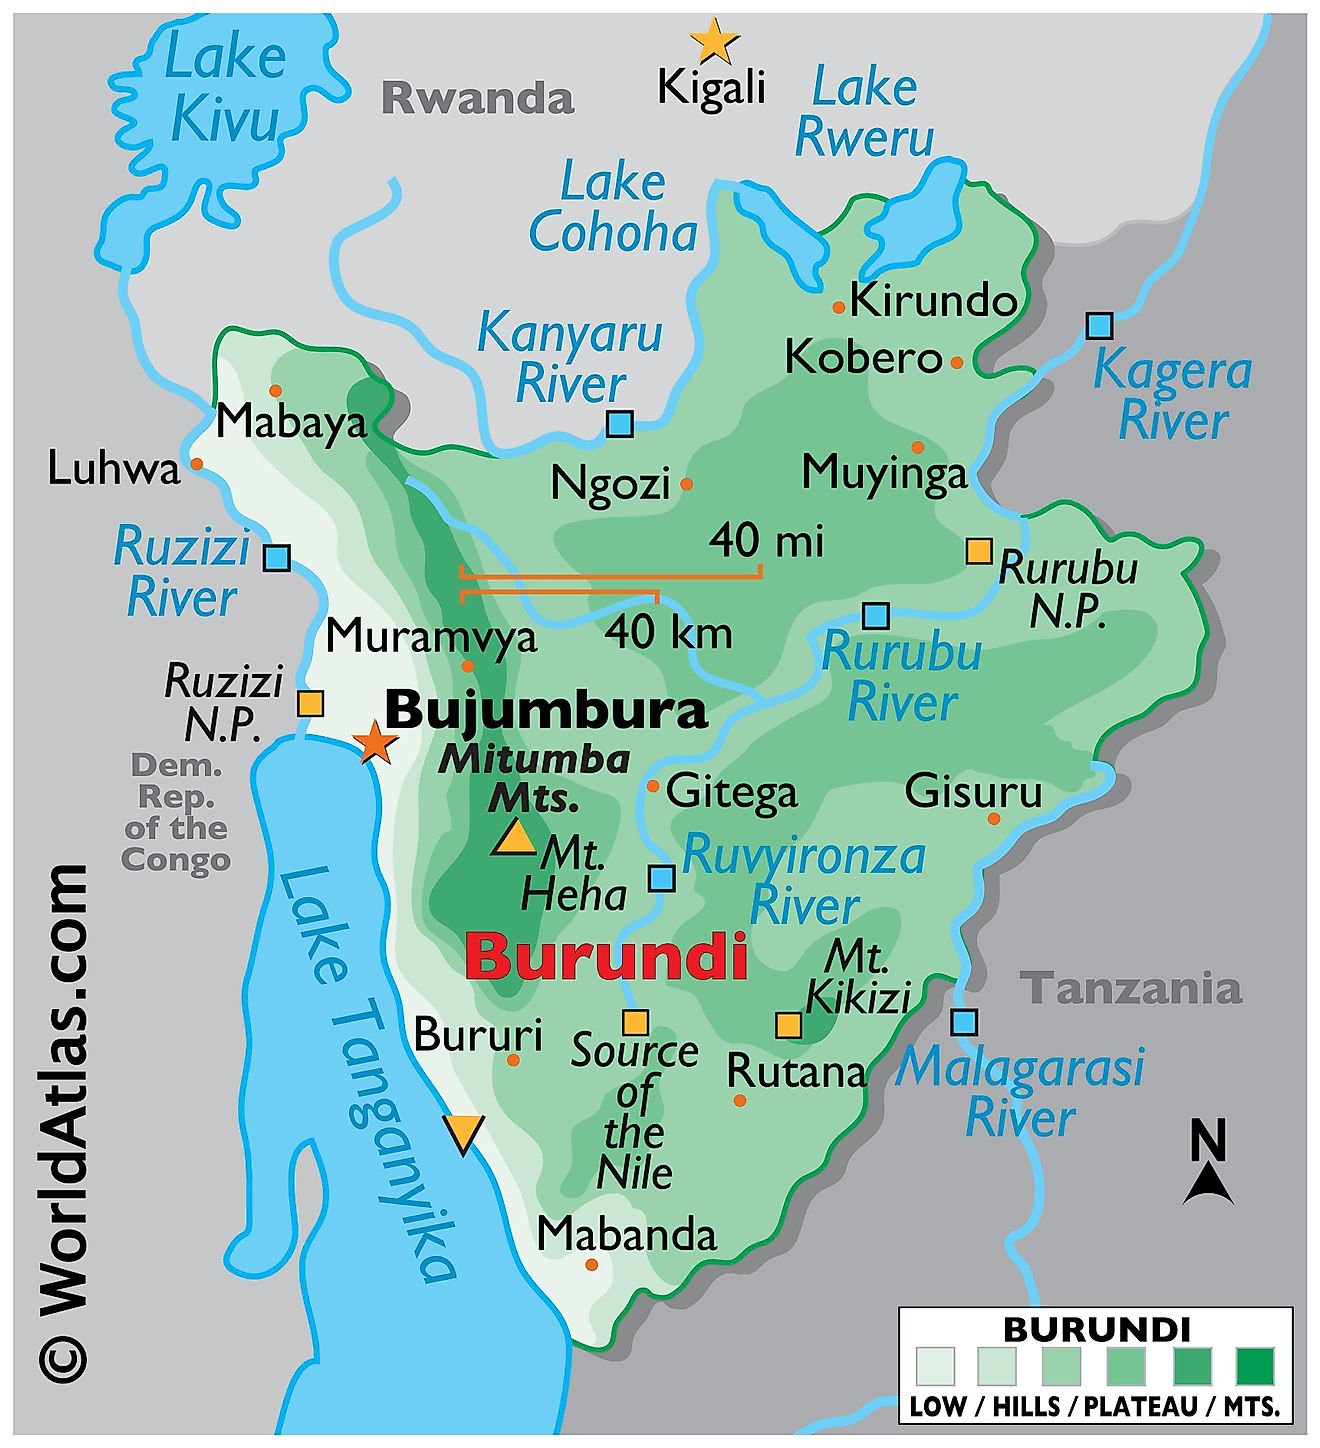 Physical Map of Burundi with state boundaries. Details the relief, physical features of the country, including mountain ranges, various bodies of water such as the Lake Tanganyika, major rivers, cities, extreme points, etc.